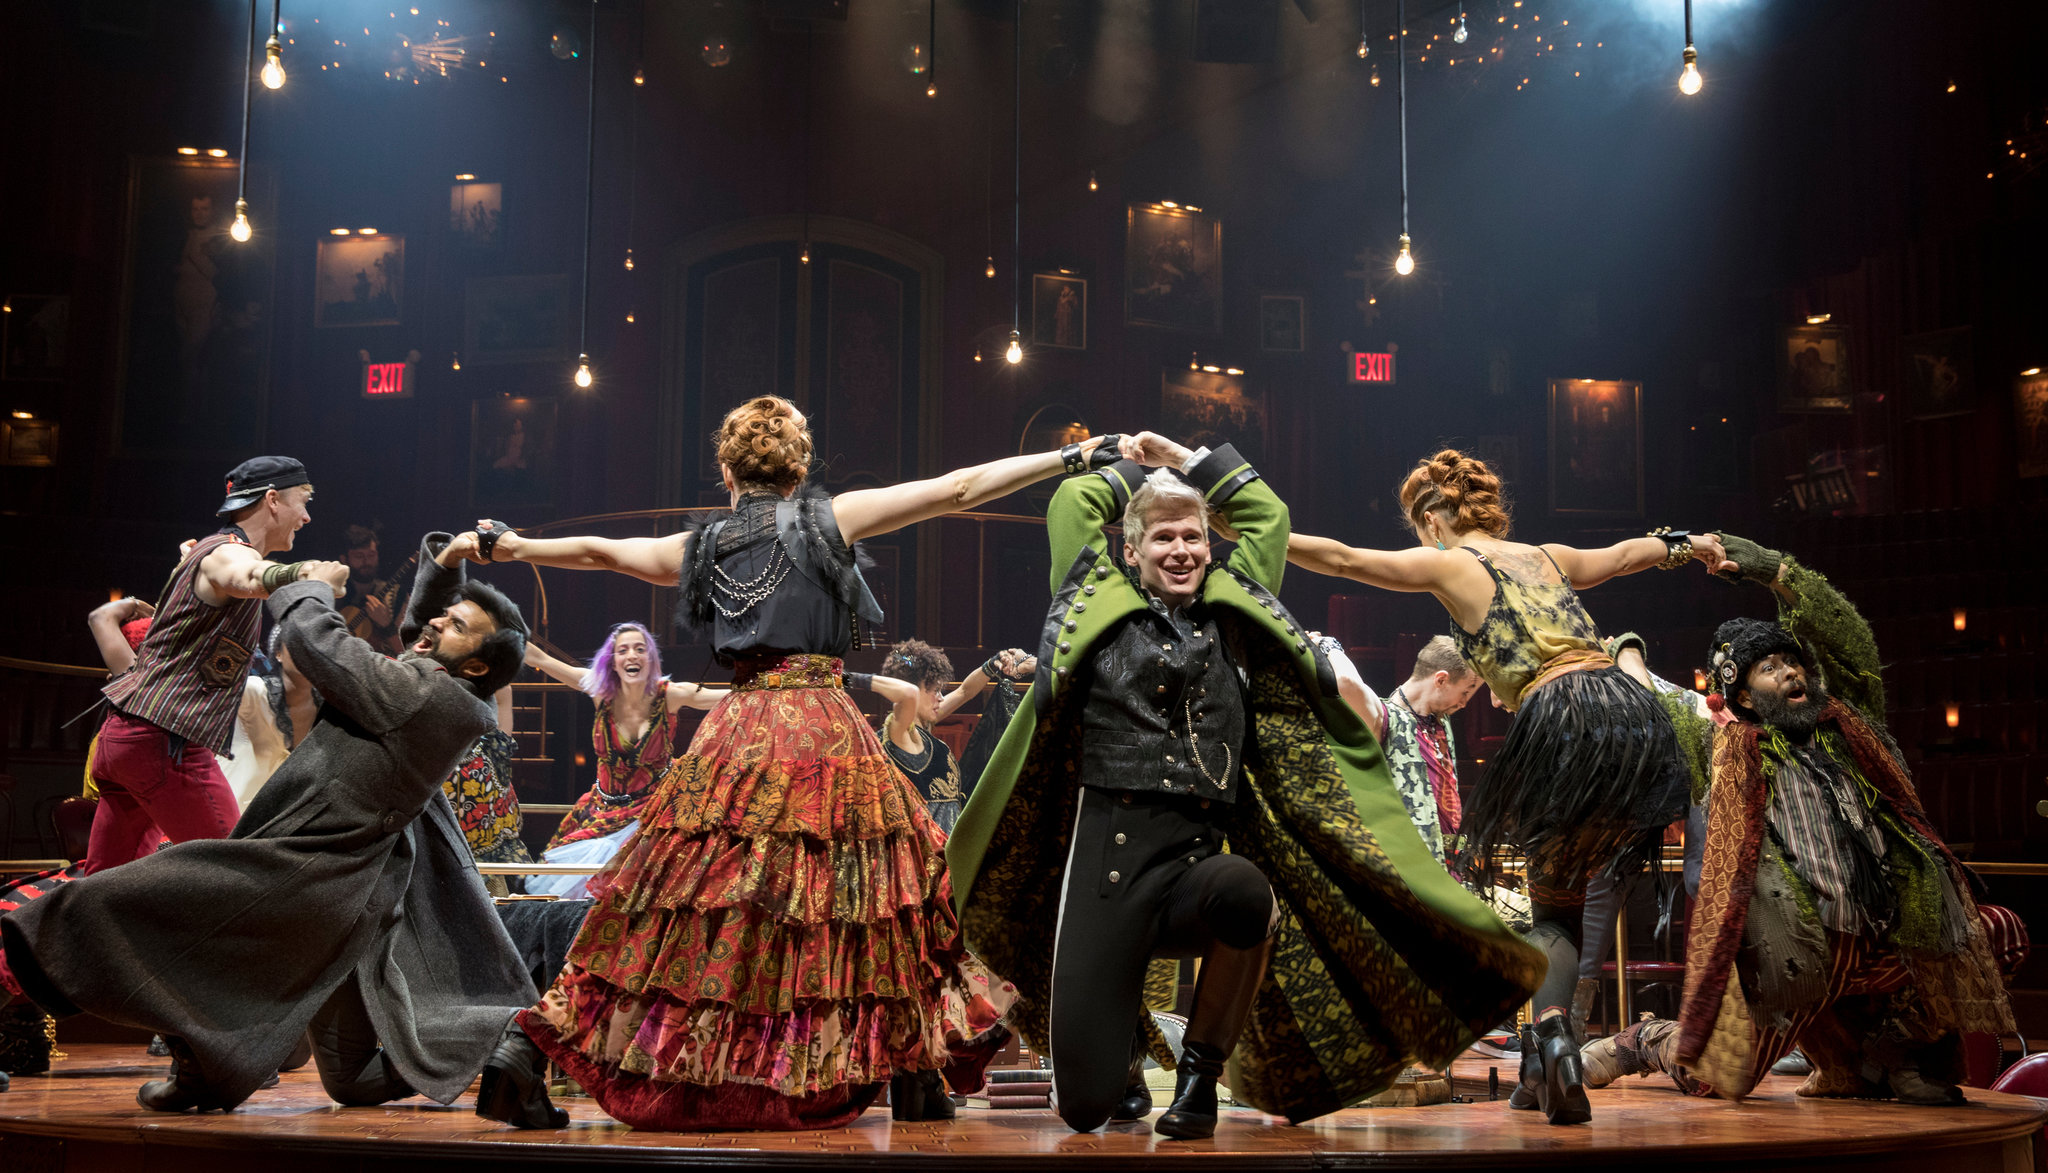 The cast dances during the song "The Abduction" in a shot from Natasha, Pierre, and the Great Comet of 1812, 2016-2017 (Image by Tim Chaffee and Maureen Towey).